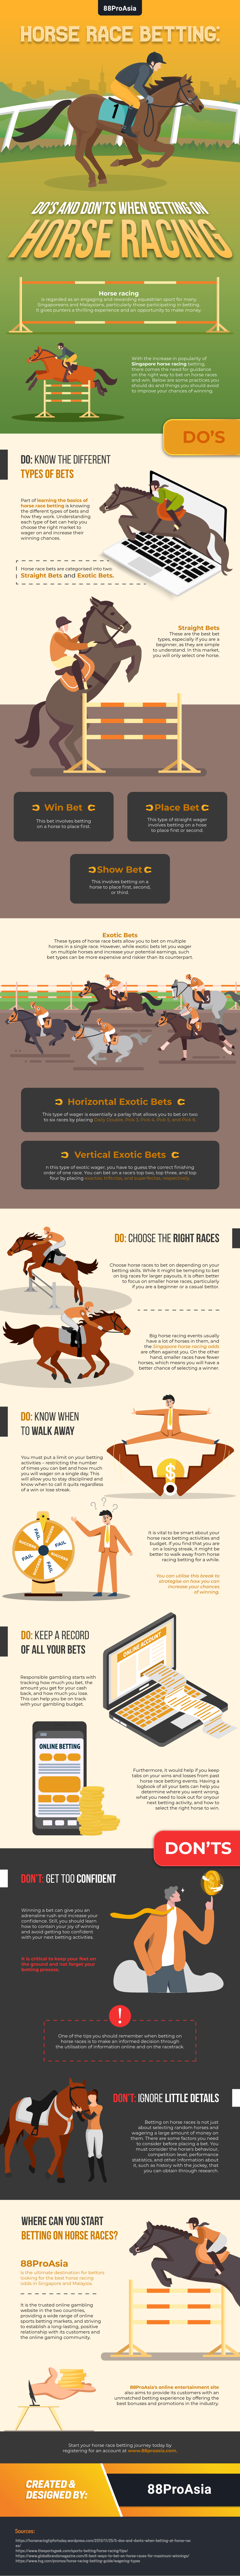 HORSE RACE BETTING DOS AND DONTS WHEN BETTING ON HORSE RACING